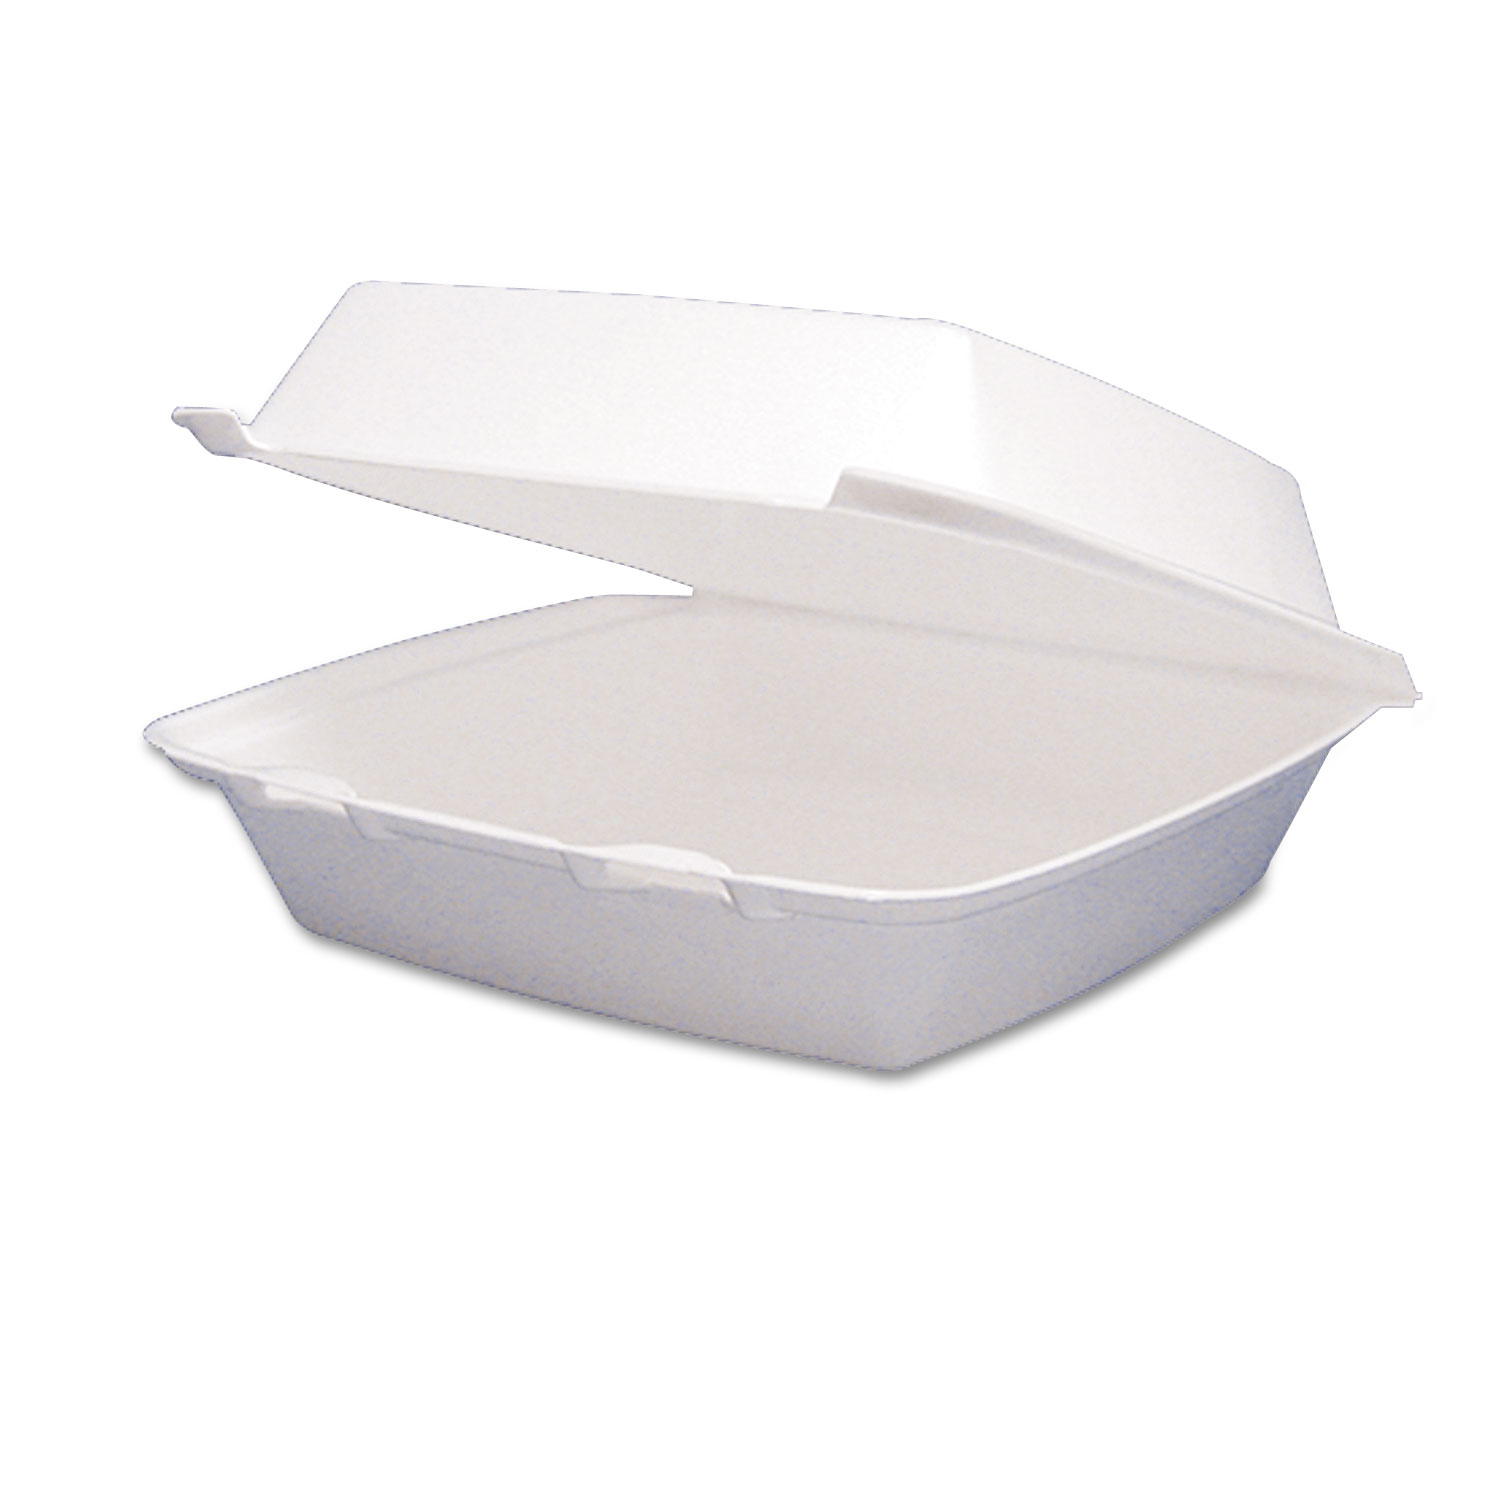  Dart 85HT1R Foam Container, Hinged Lid, 1-Comp, 8 3/8 x 7 7/8 x 3 1/4, 200/Carton (DCC85HT1R) 